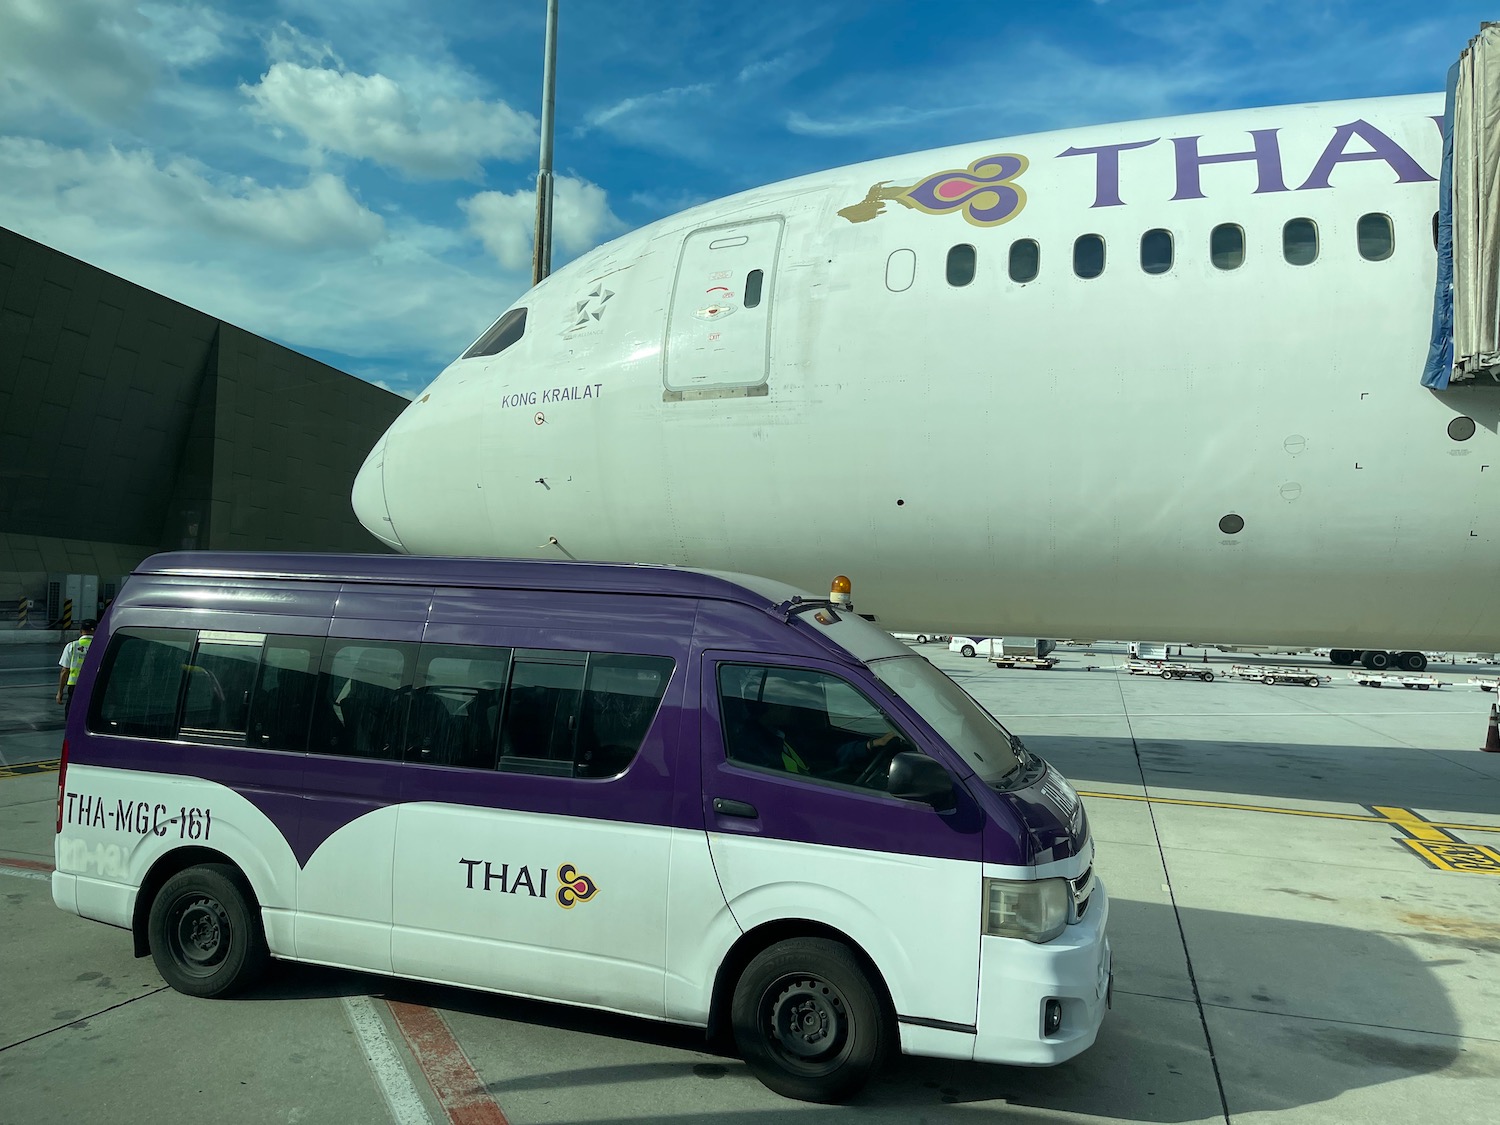 a white and purple van next to a large airplane